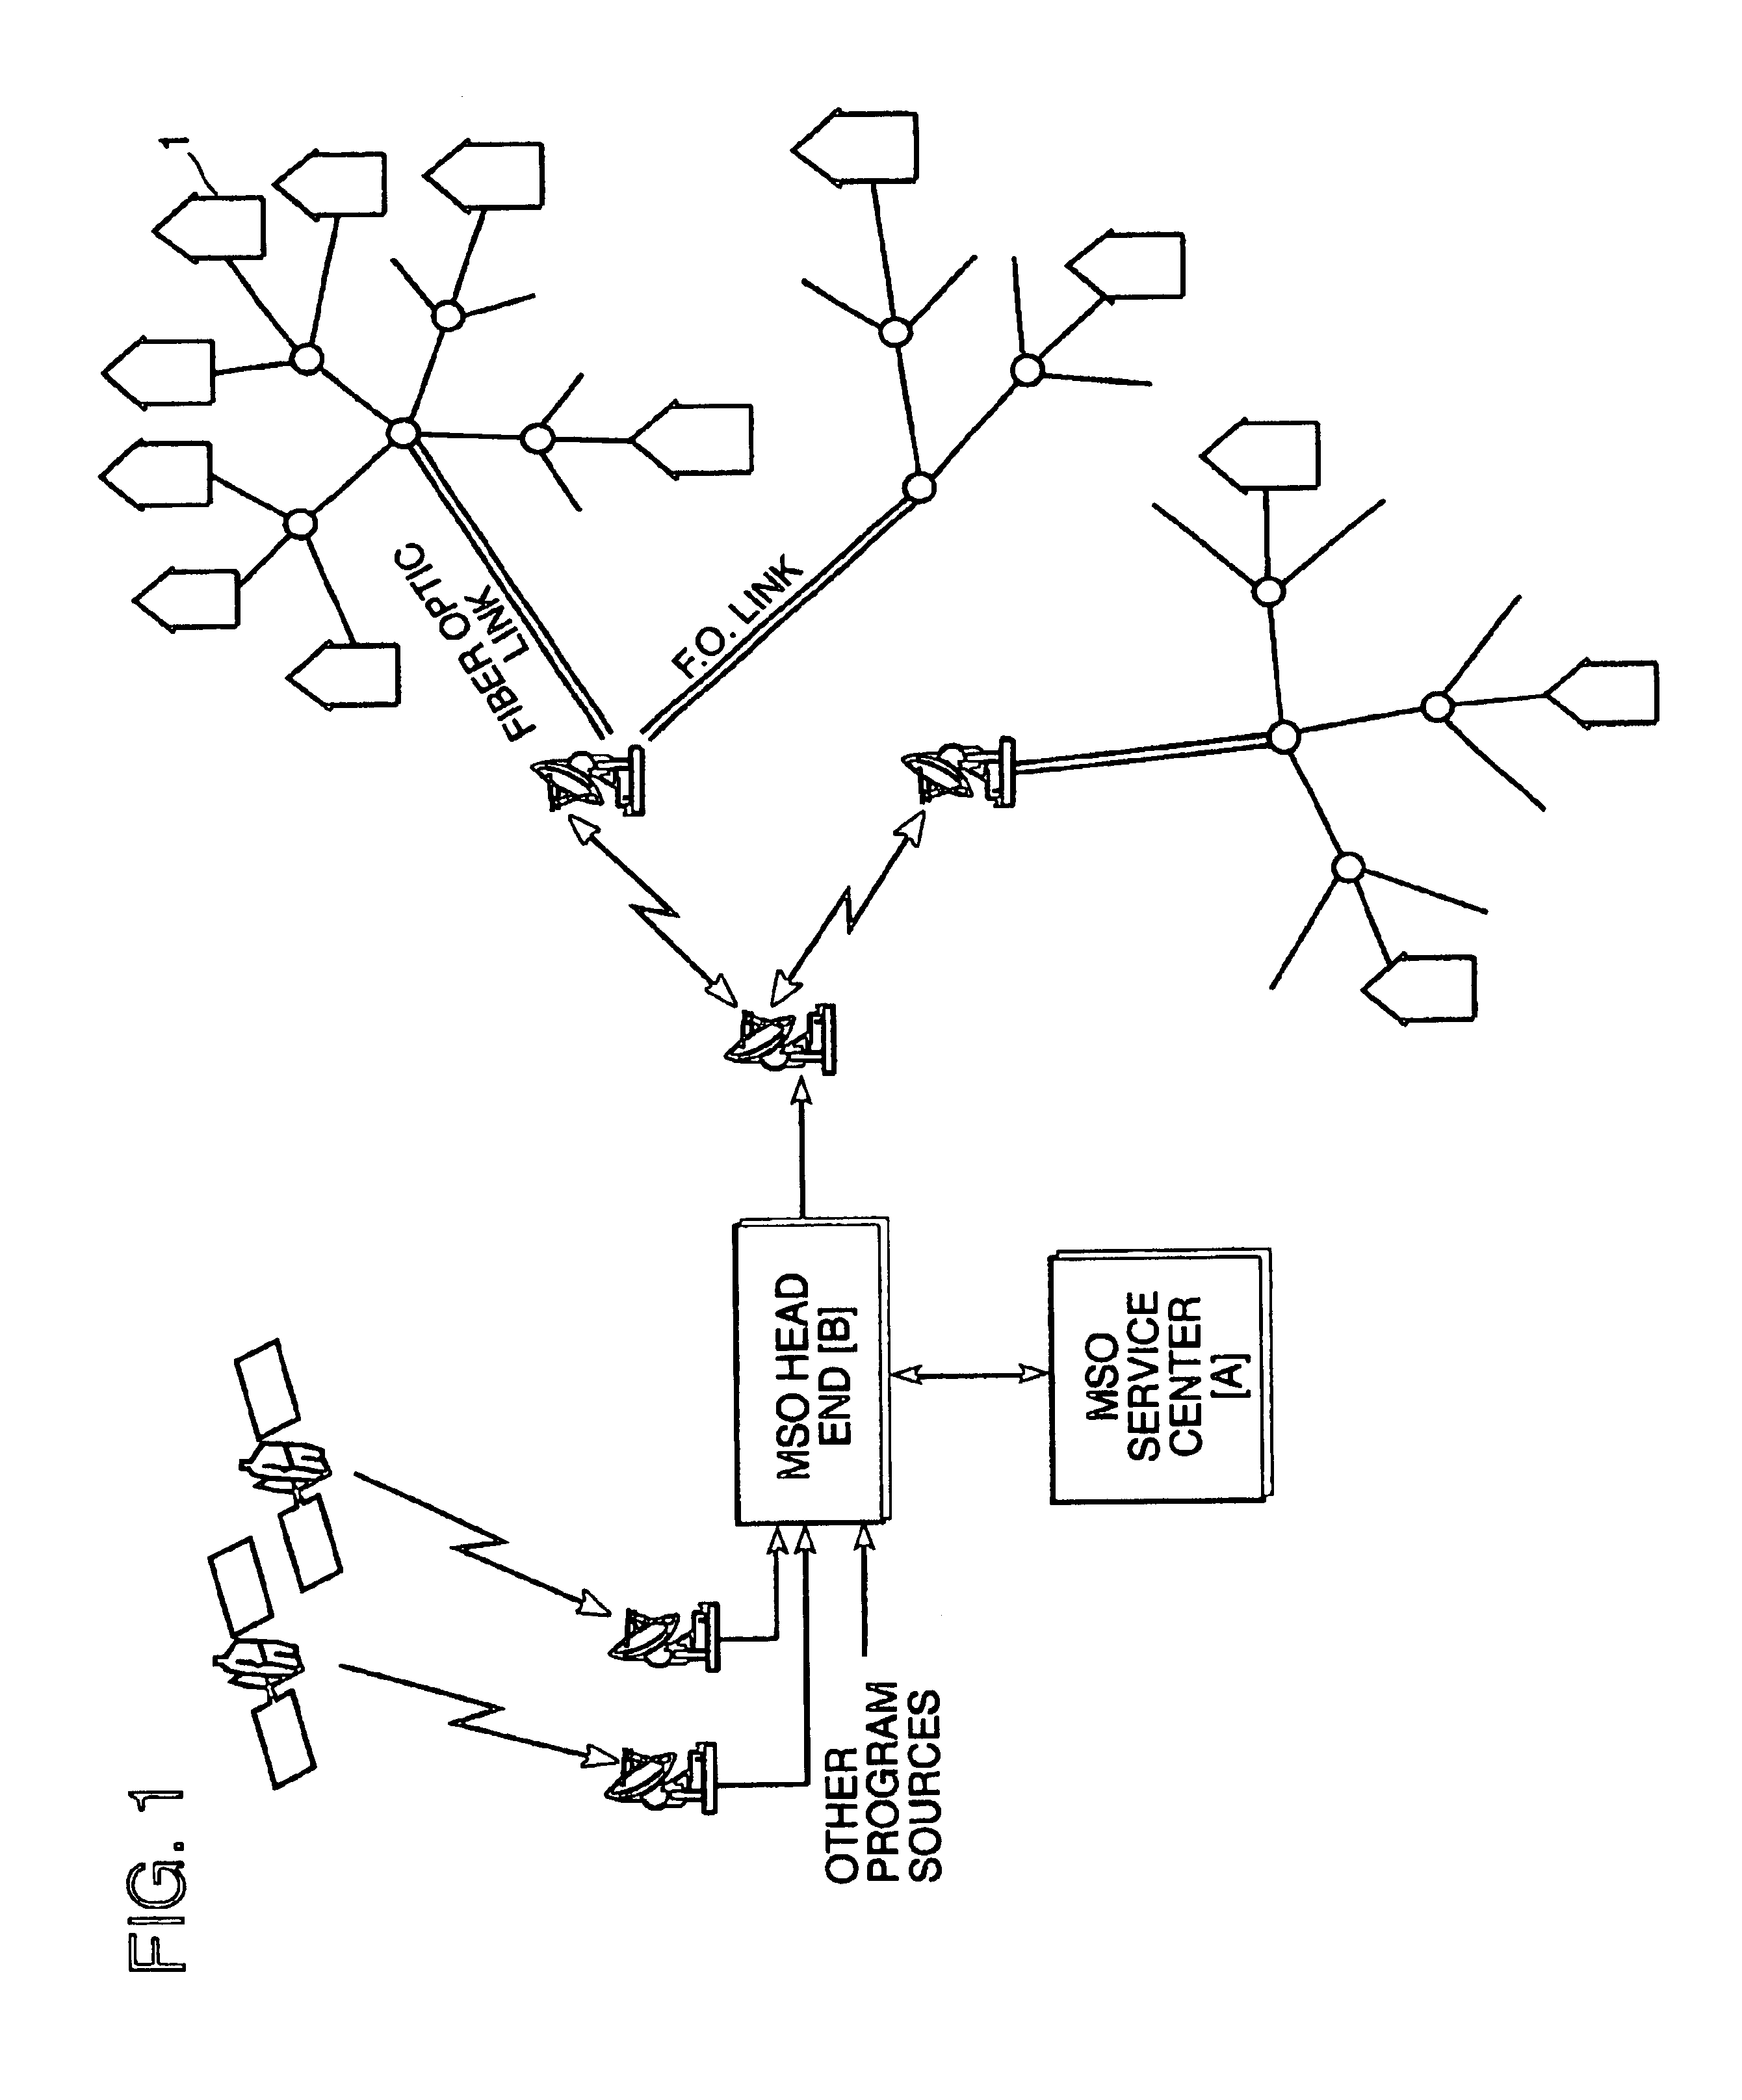 Method and apparatus for on-demand video program access control using integrated out-of-band signaling for channel selection